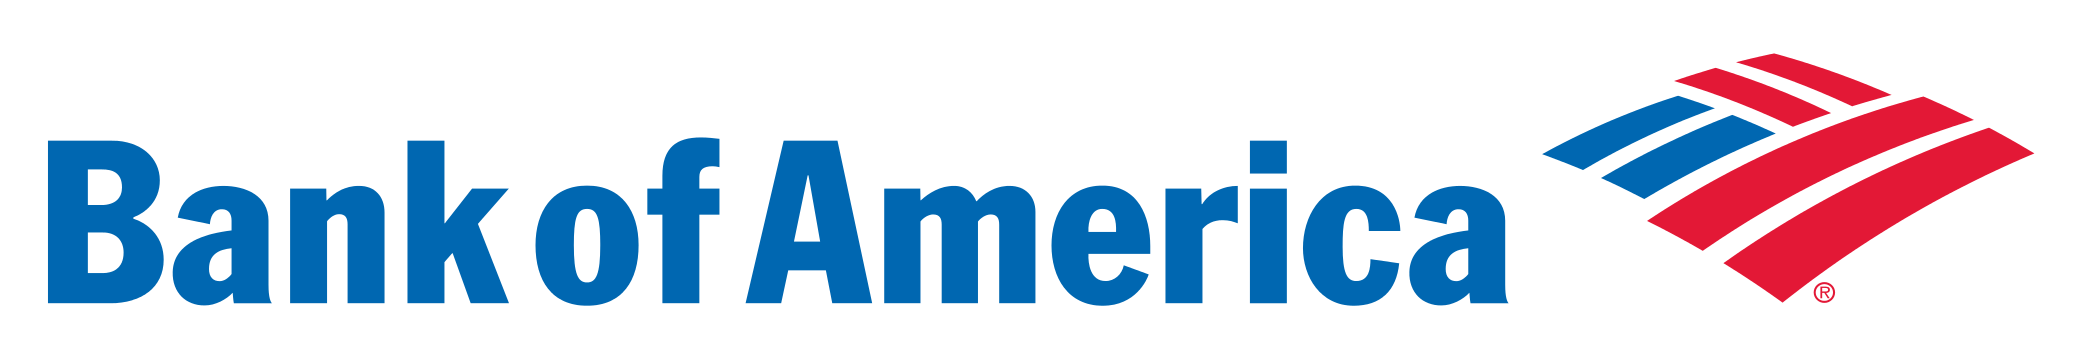 Bank of America Check Logo - Can You Get a U.S. Credit Card When Living Overseas? | LendEDU